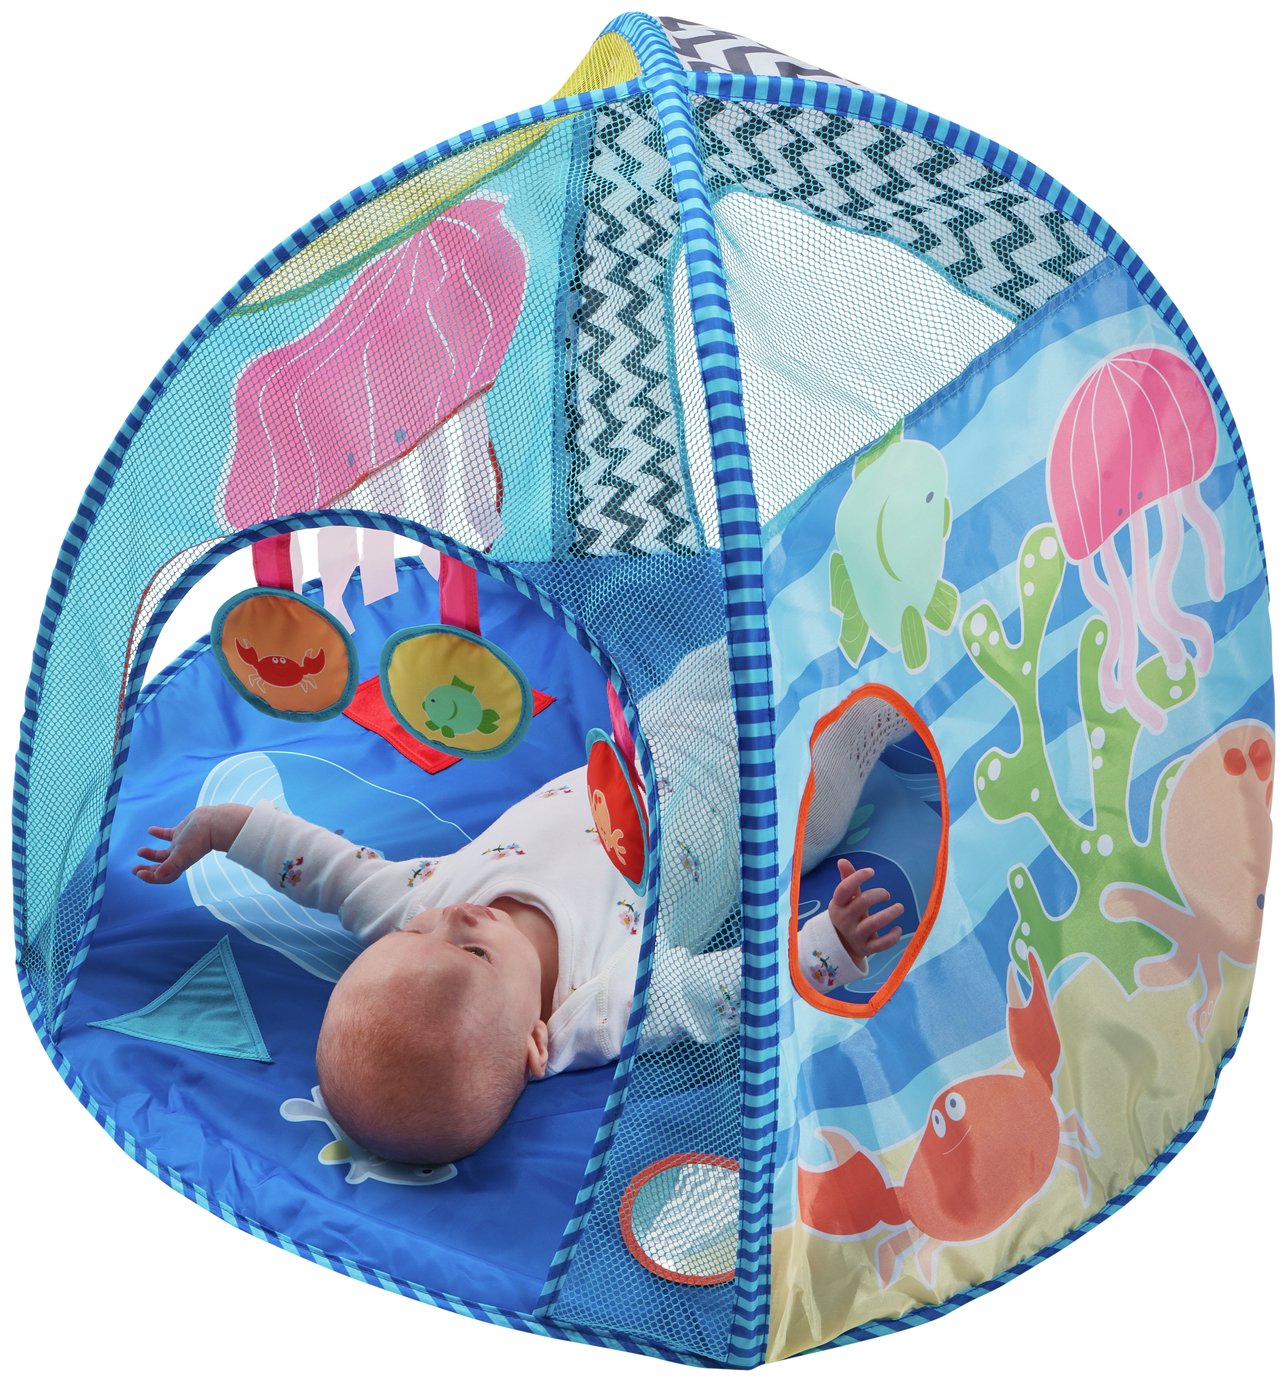 Chad Valley Sensory Play Gym Review